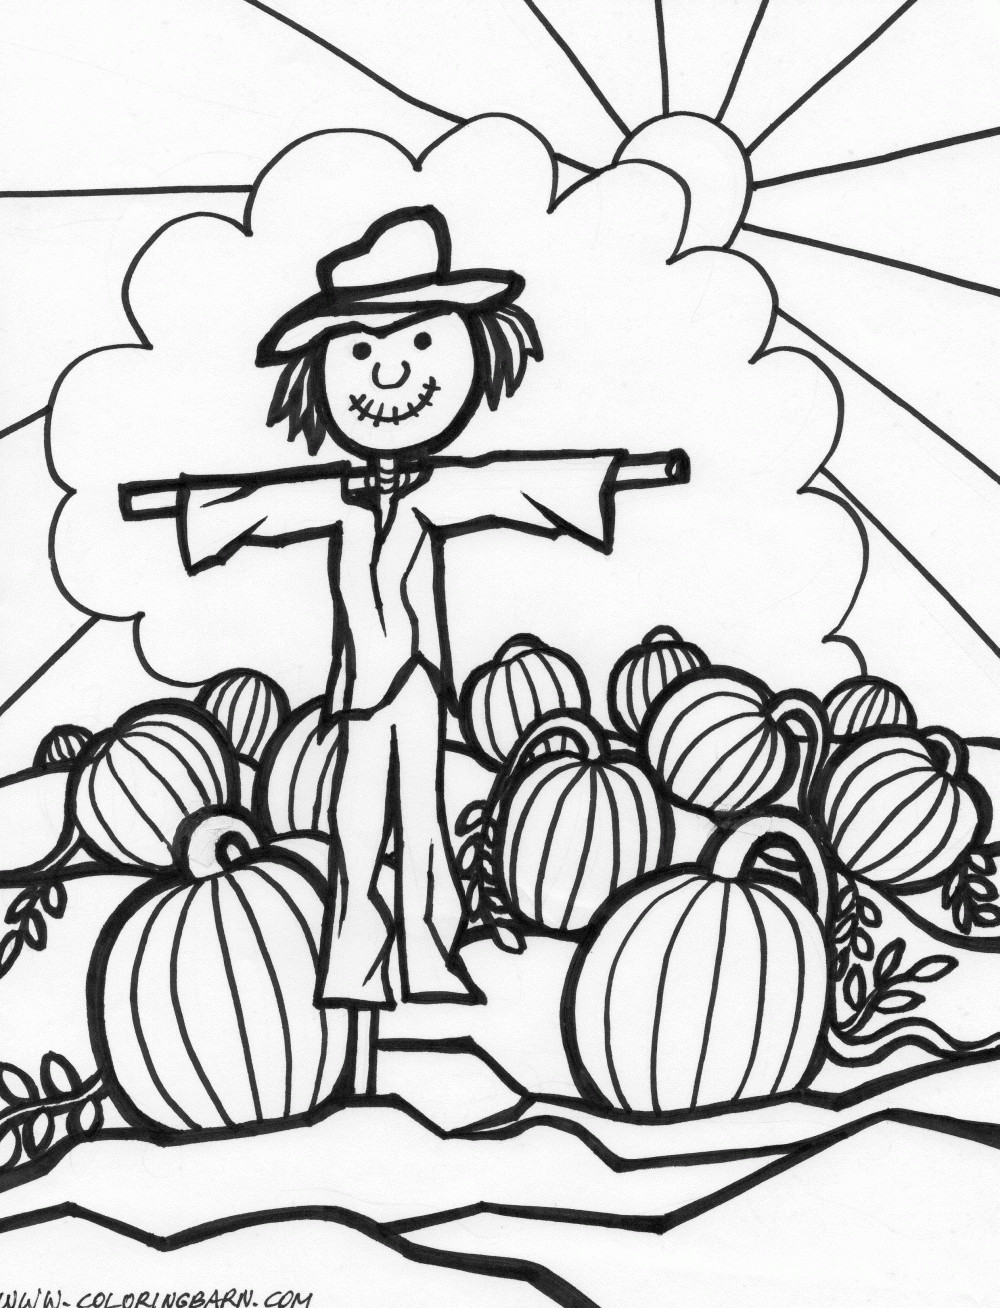 Pumpkin Coloring Pages For Kids
 transmissionpress Pumpkin Patch Coloring Page